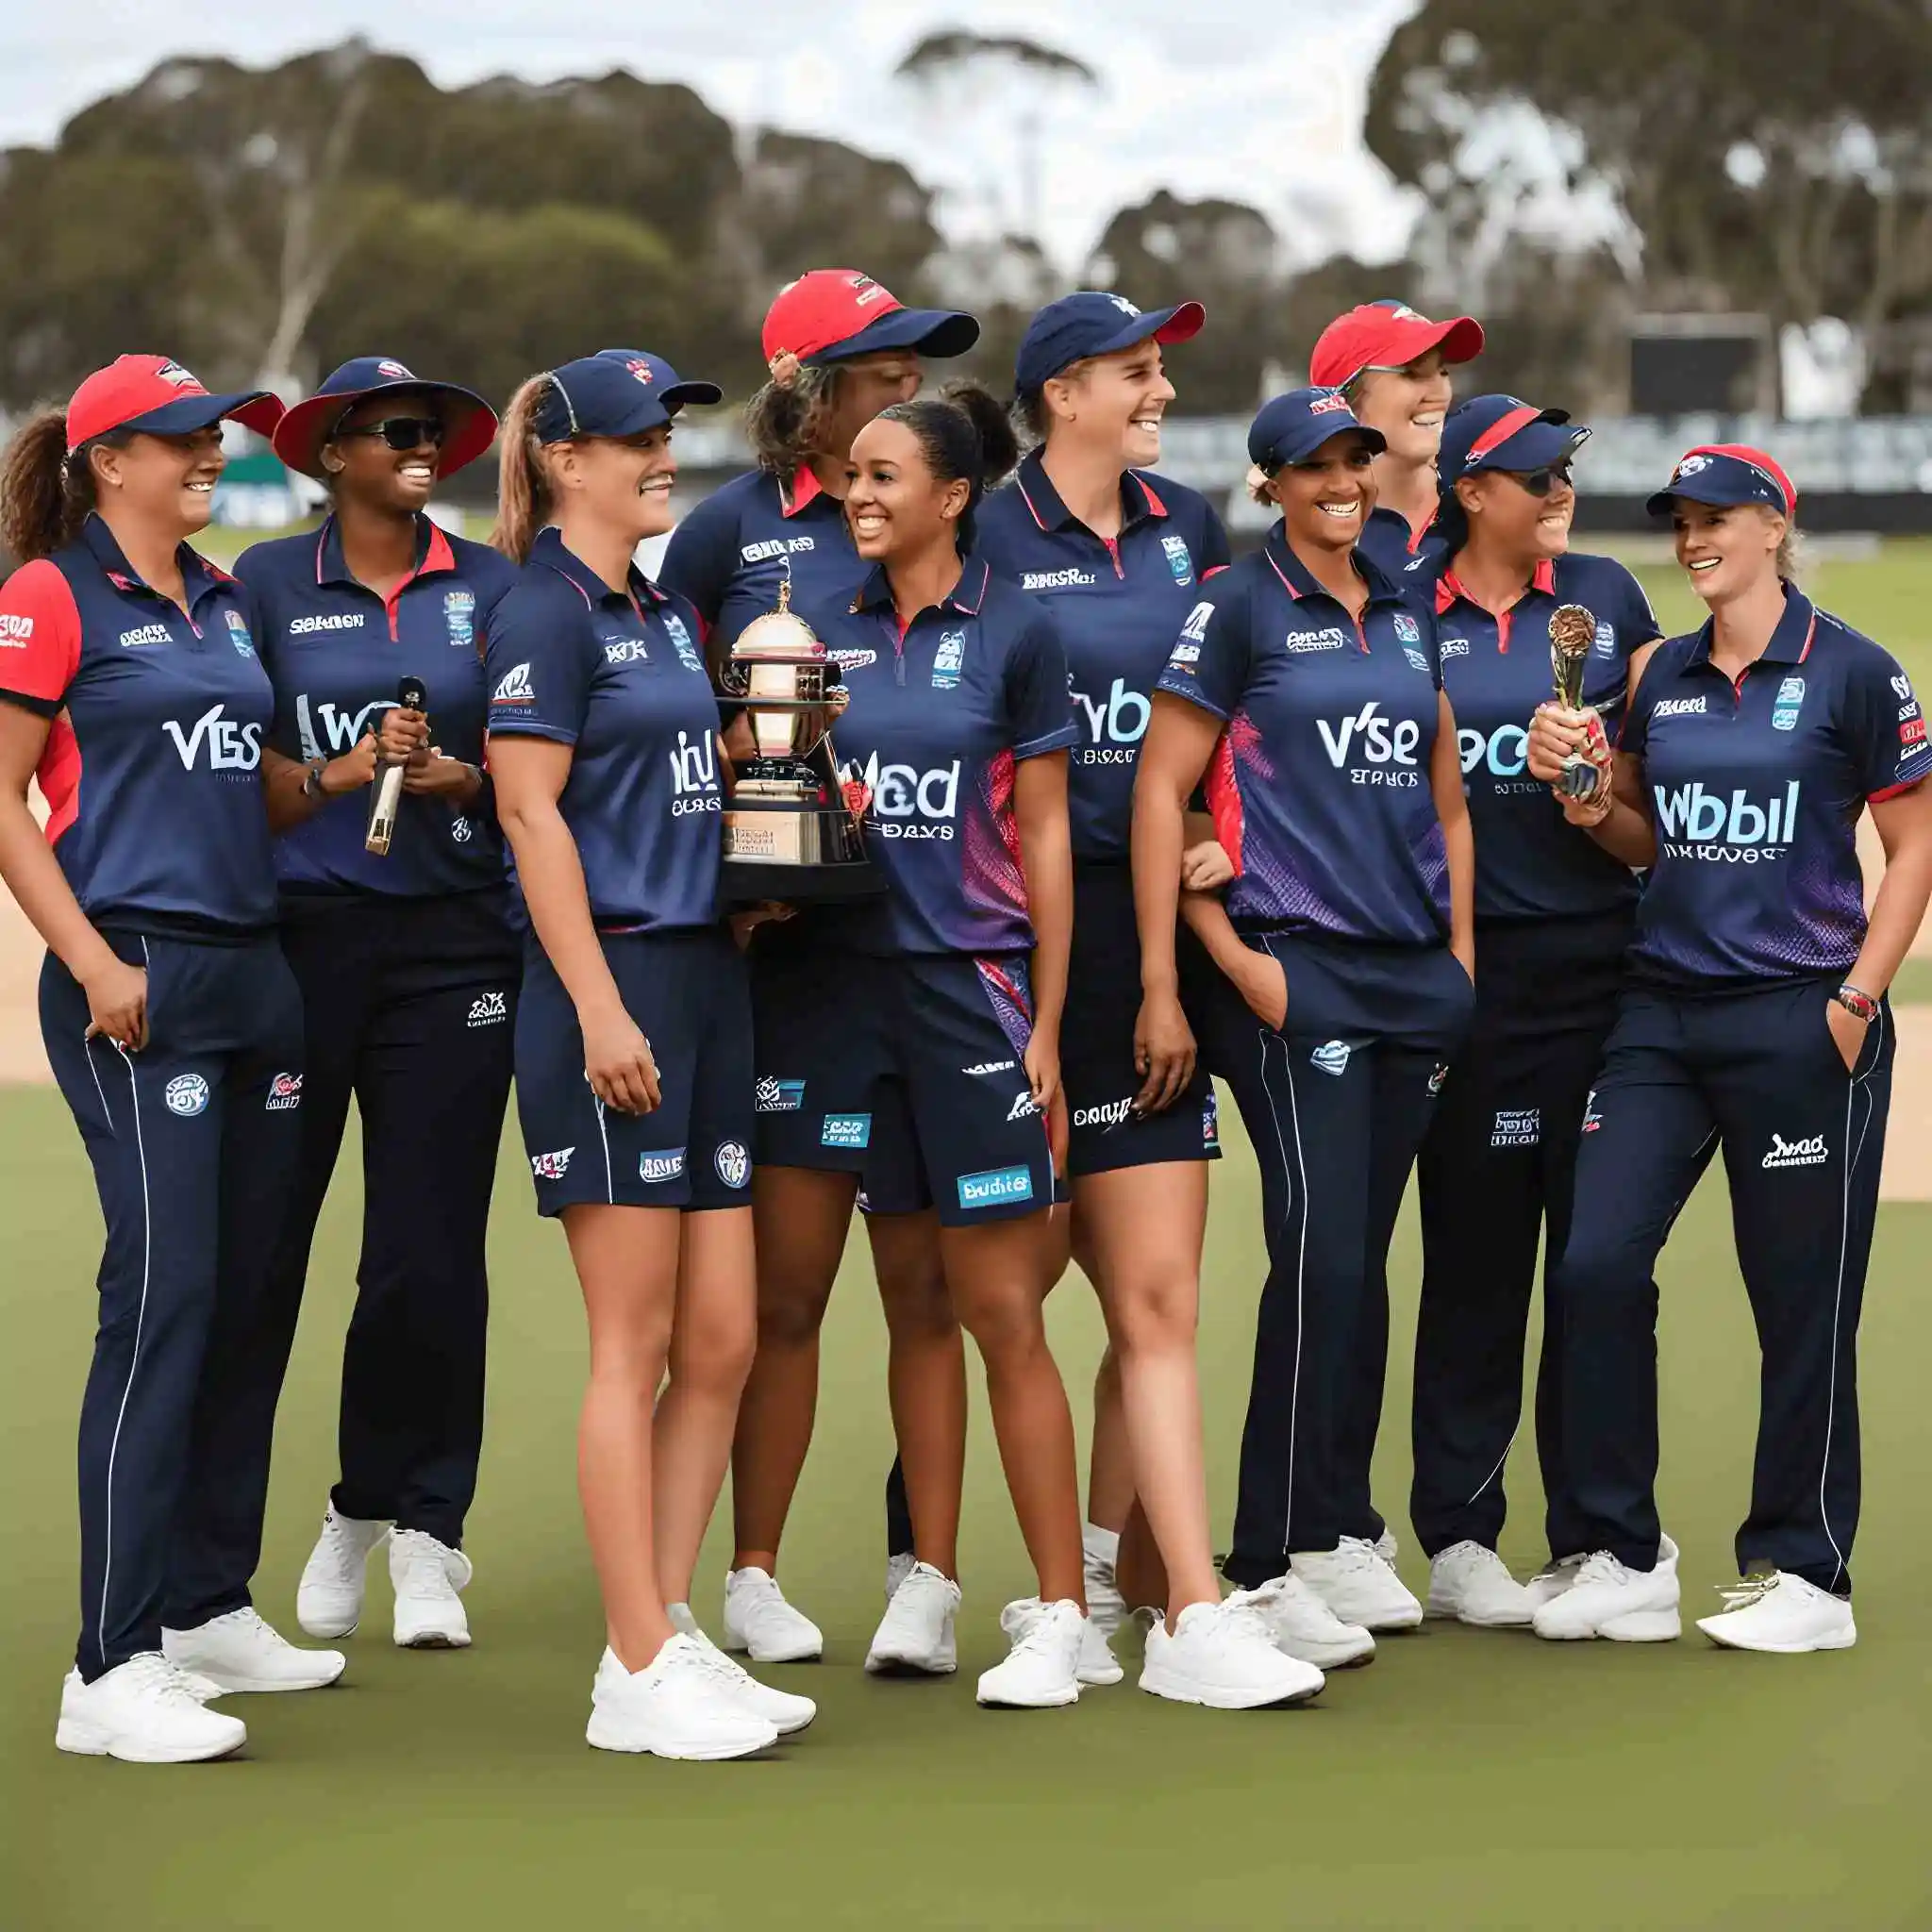 WBBL Live Streaming & TV Channels, Women’s Big Bash League Live Telecast, Schedule, Squad, Fixtures, Broadcasting Rights 2023